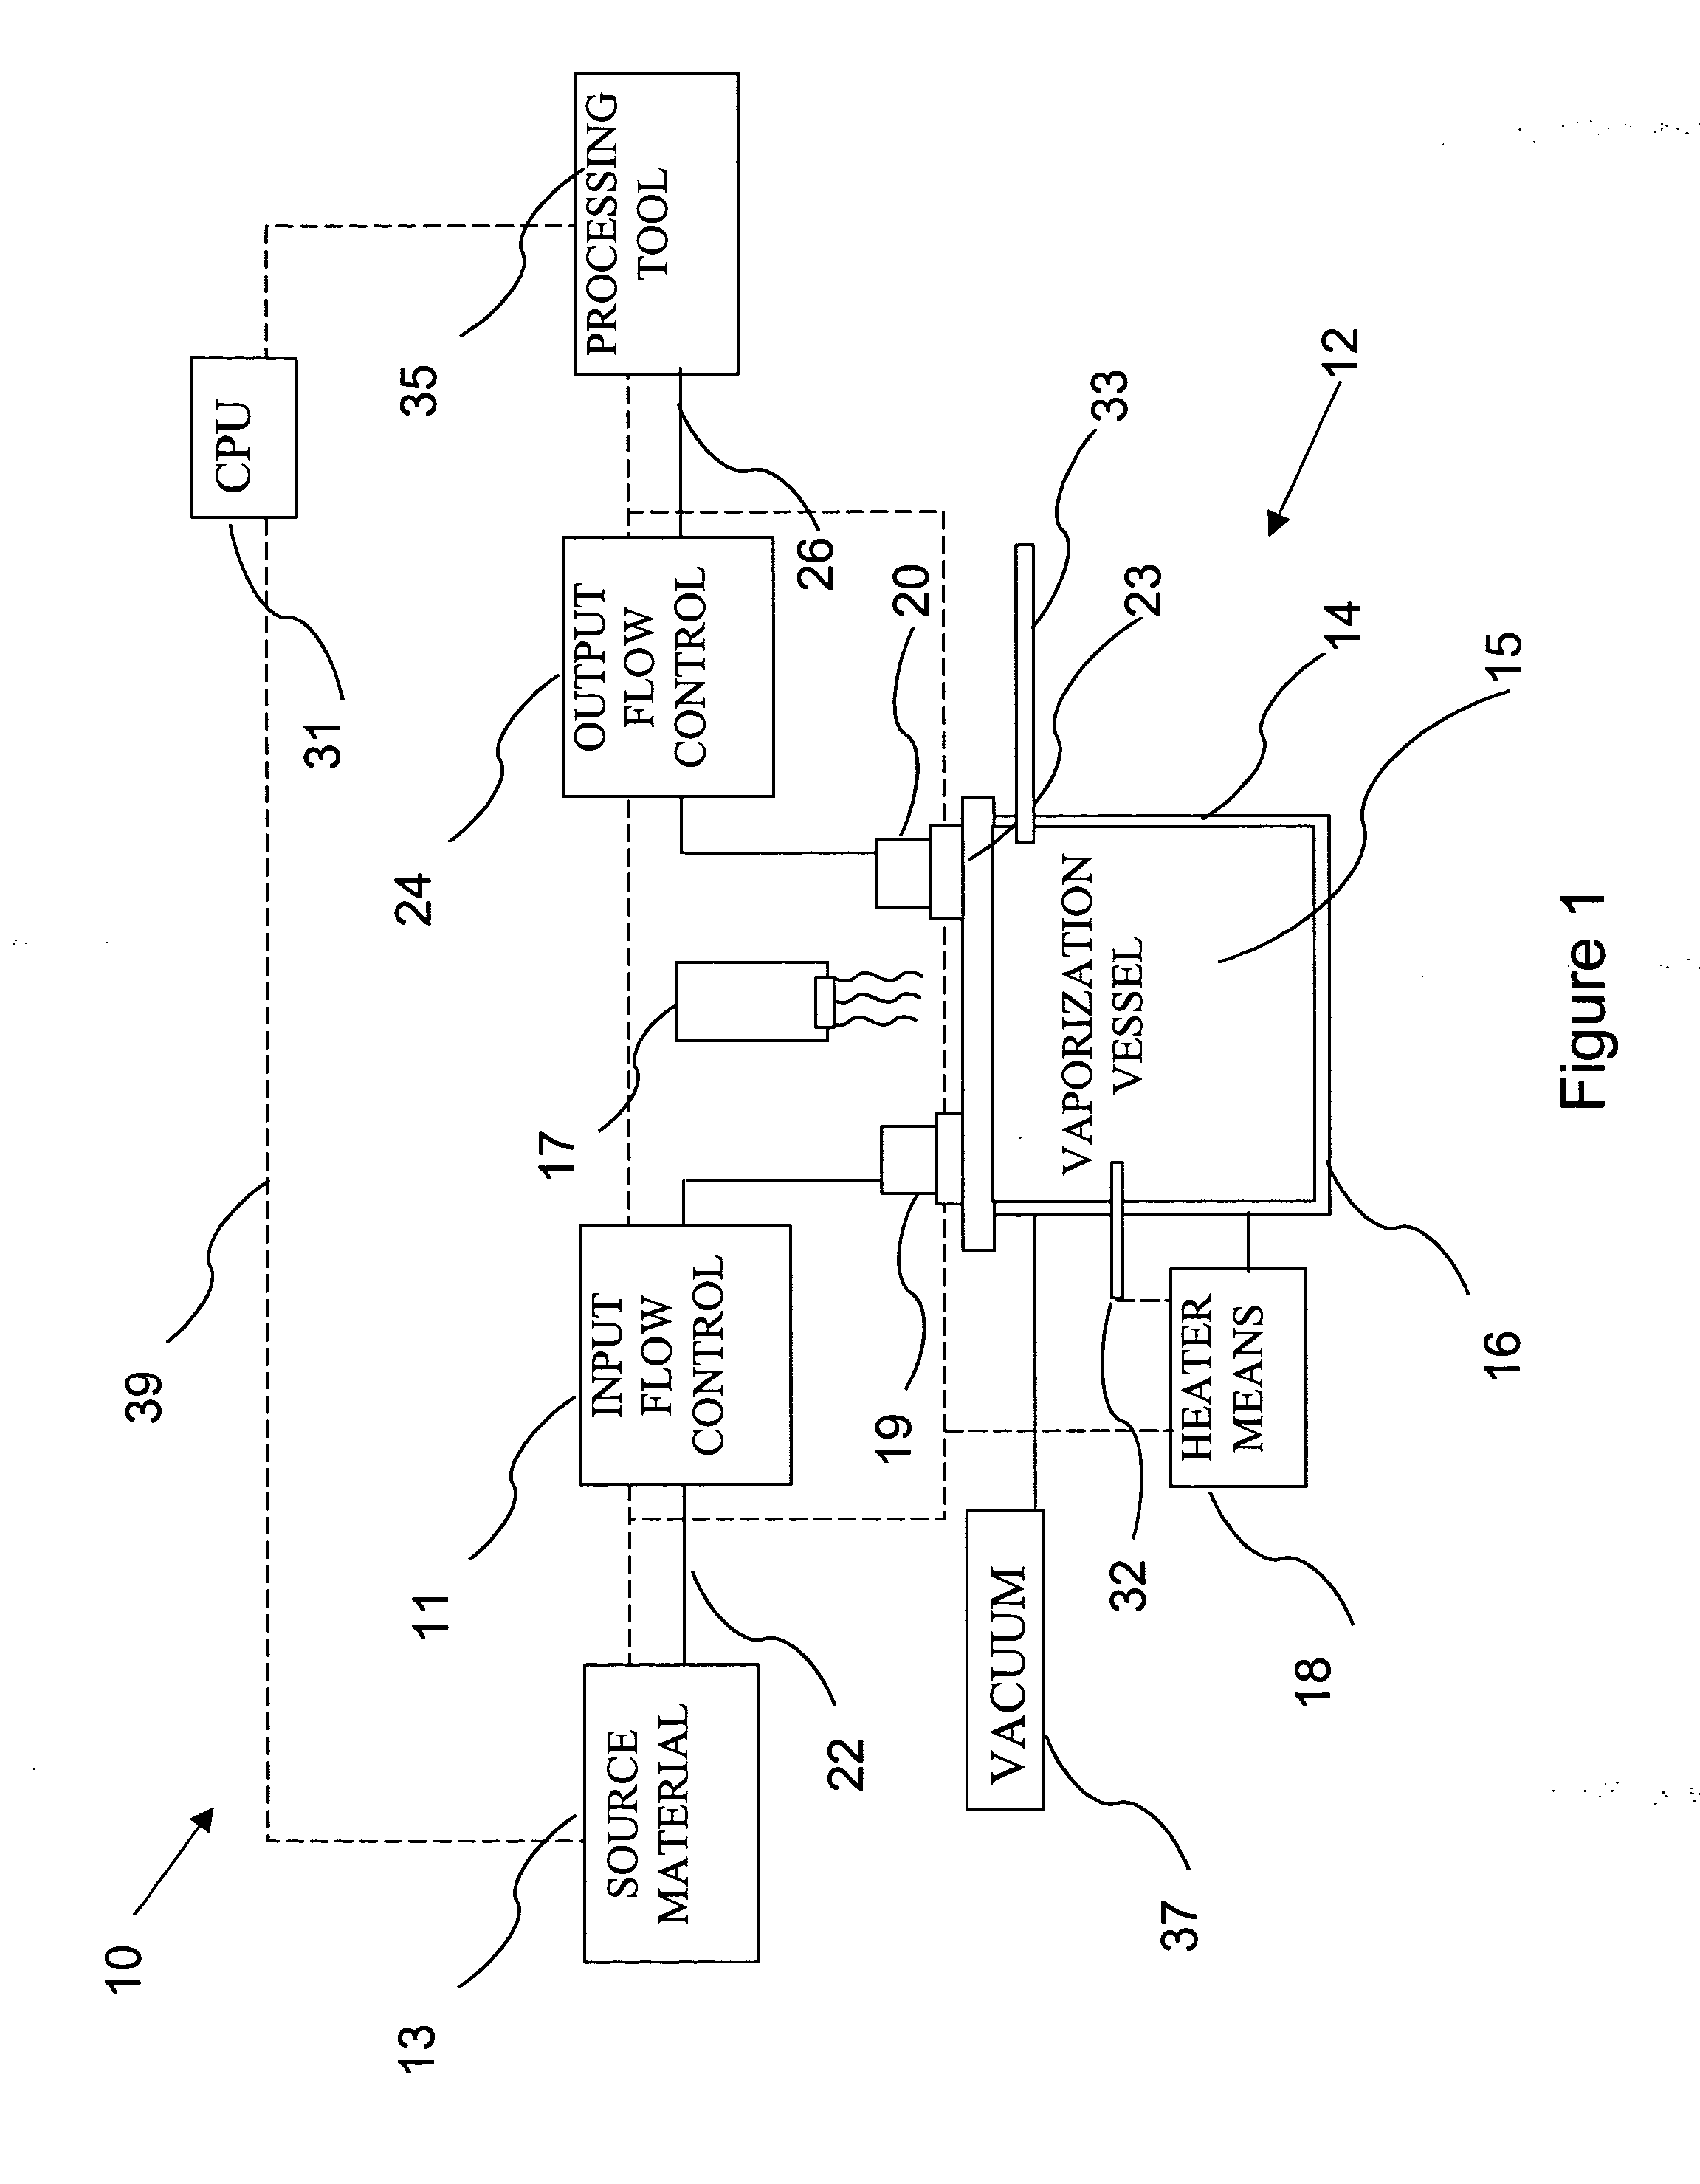 Delivery systems for efficient vaporization of precursor source material